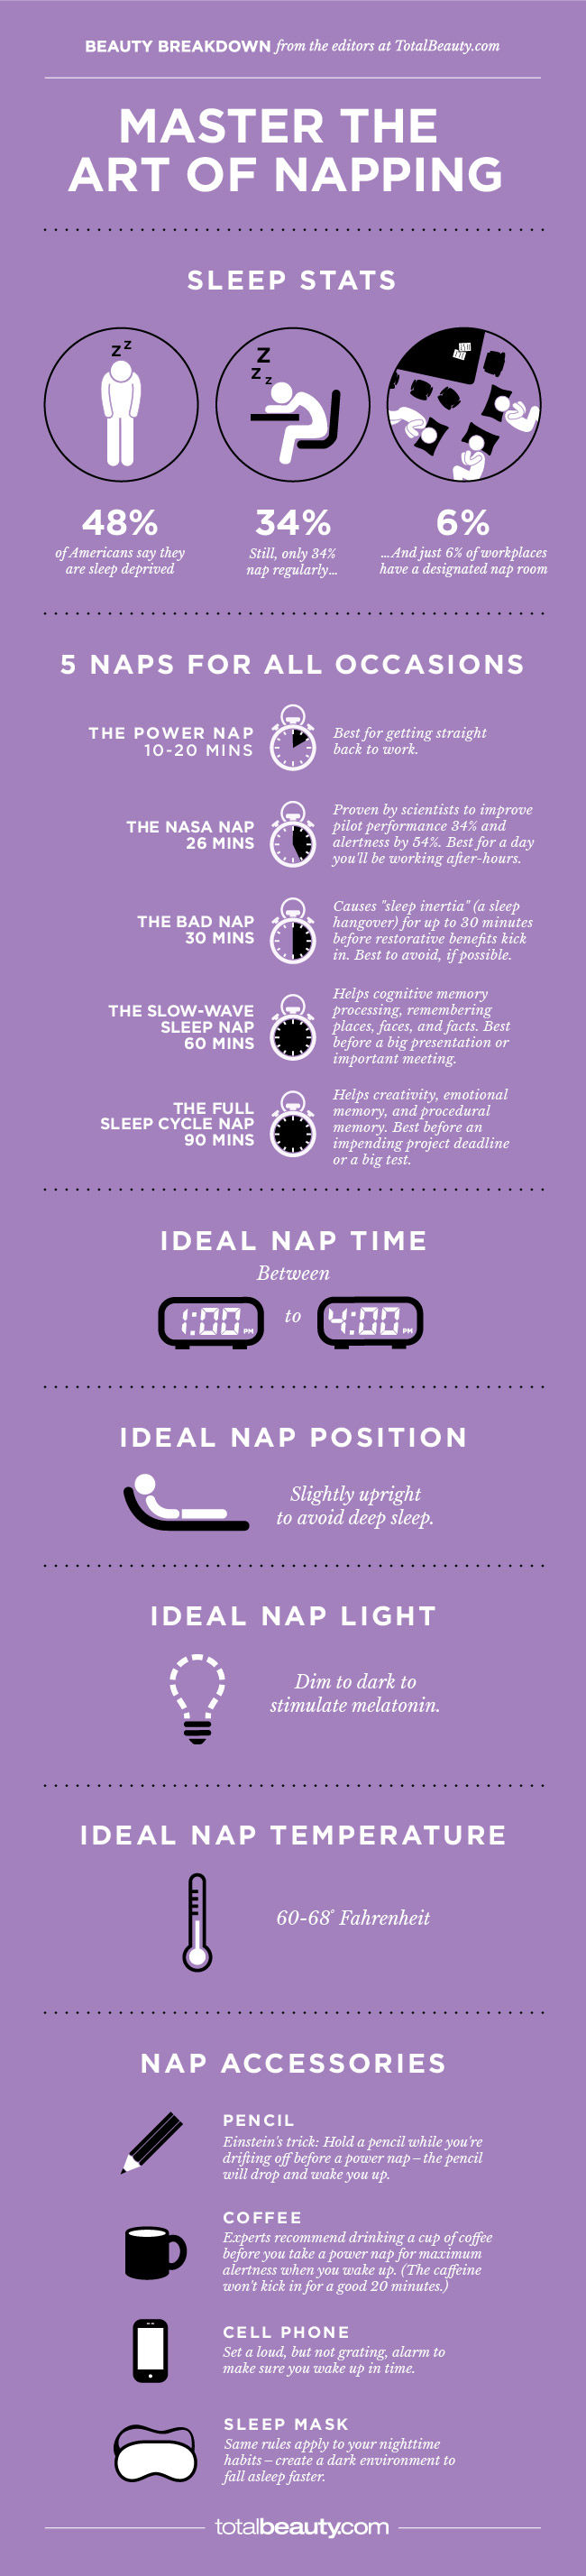 Master the Art of Napping